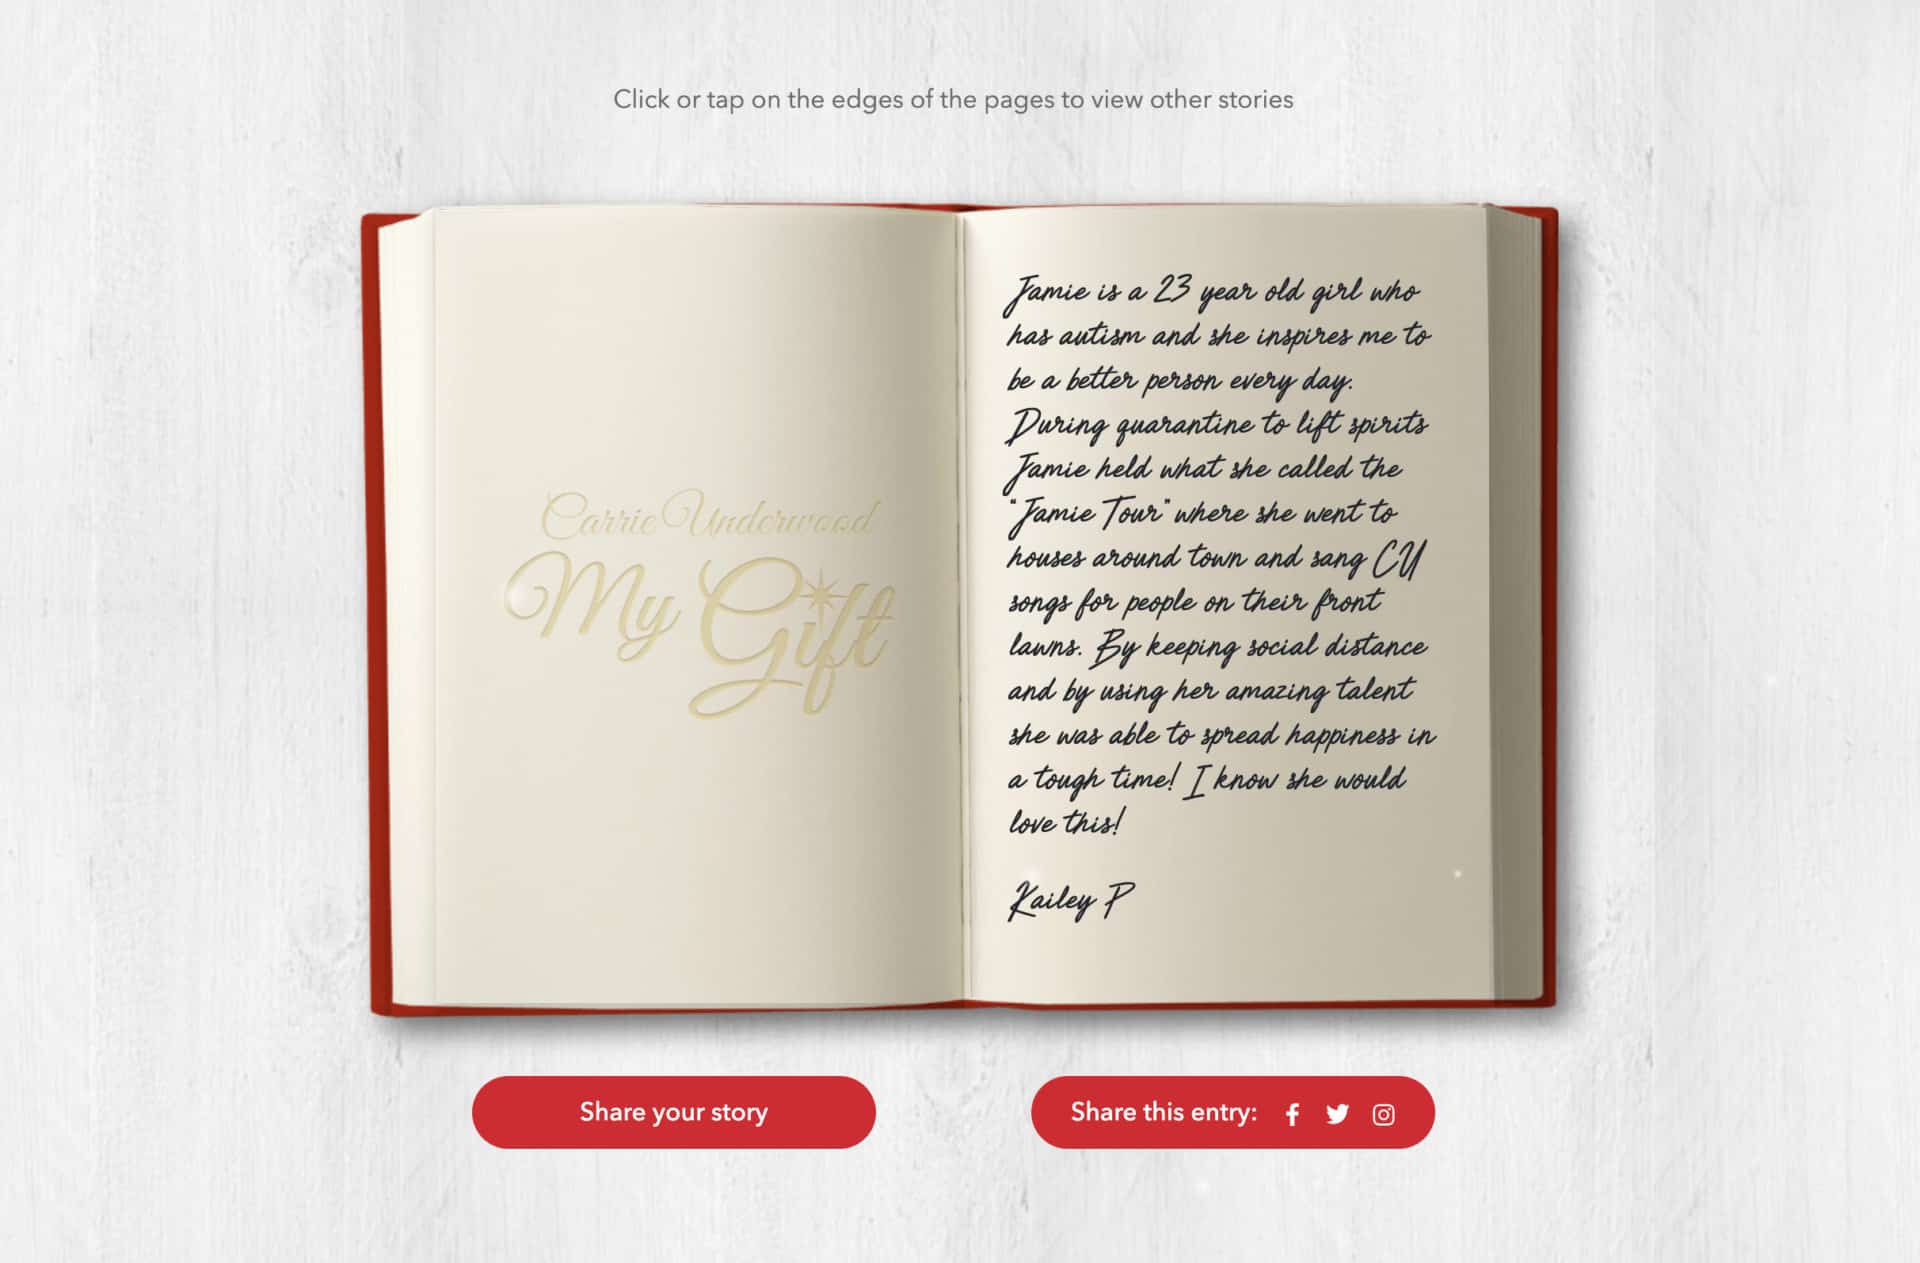 Carrie Underwood: My Gift 